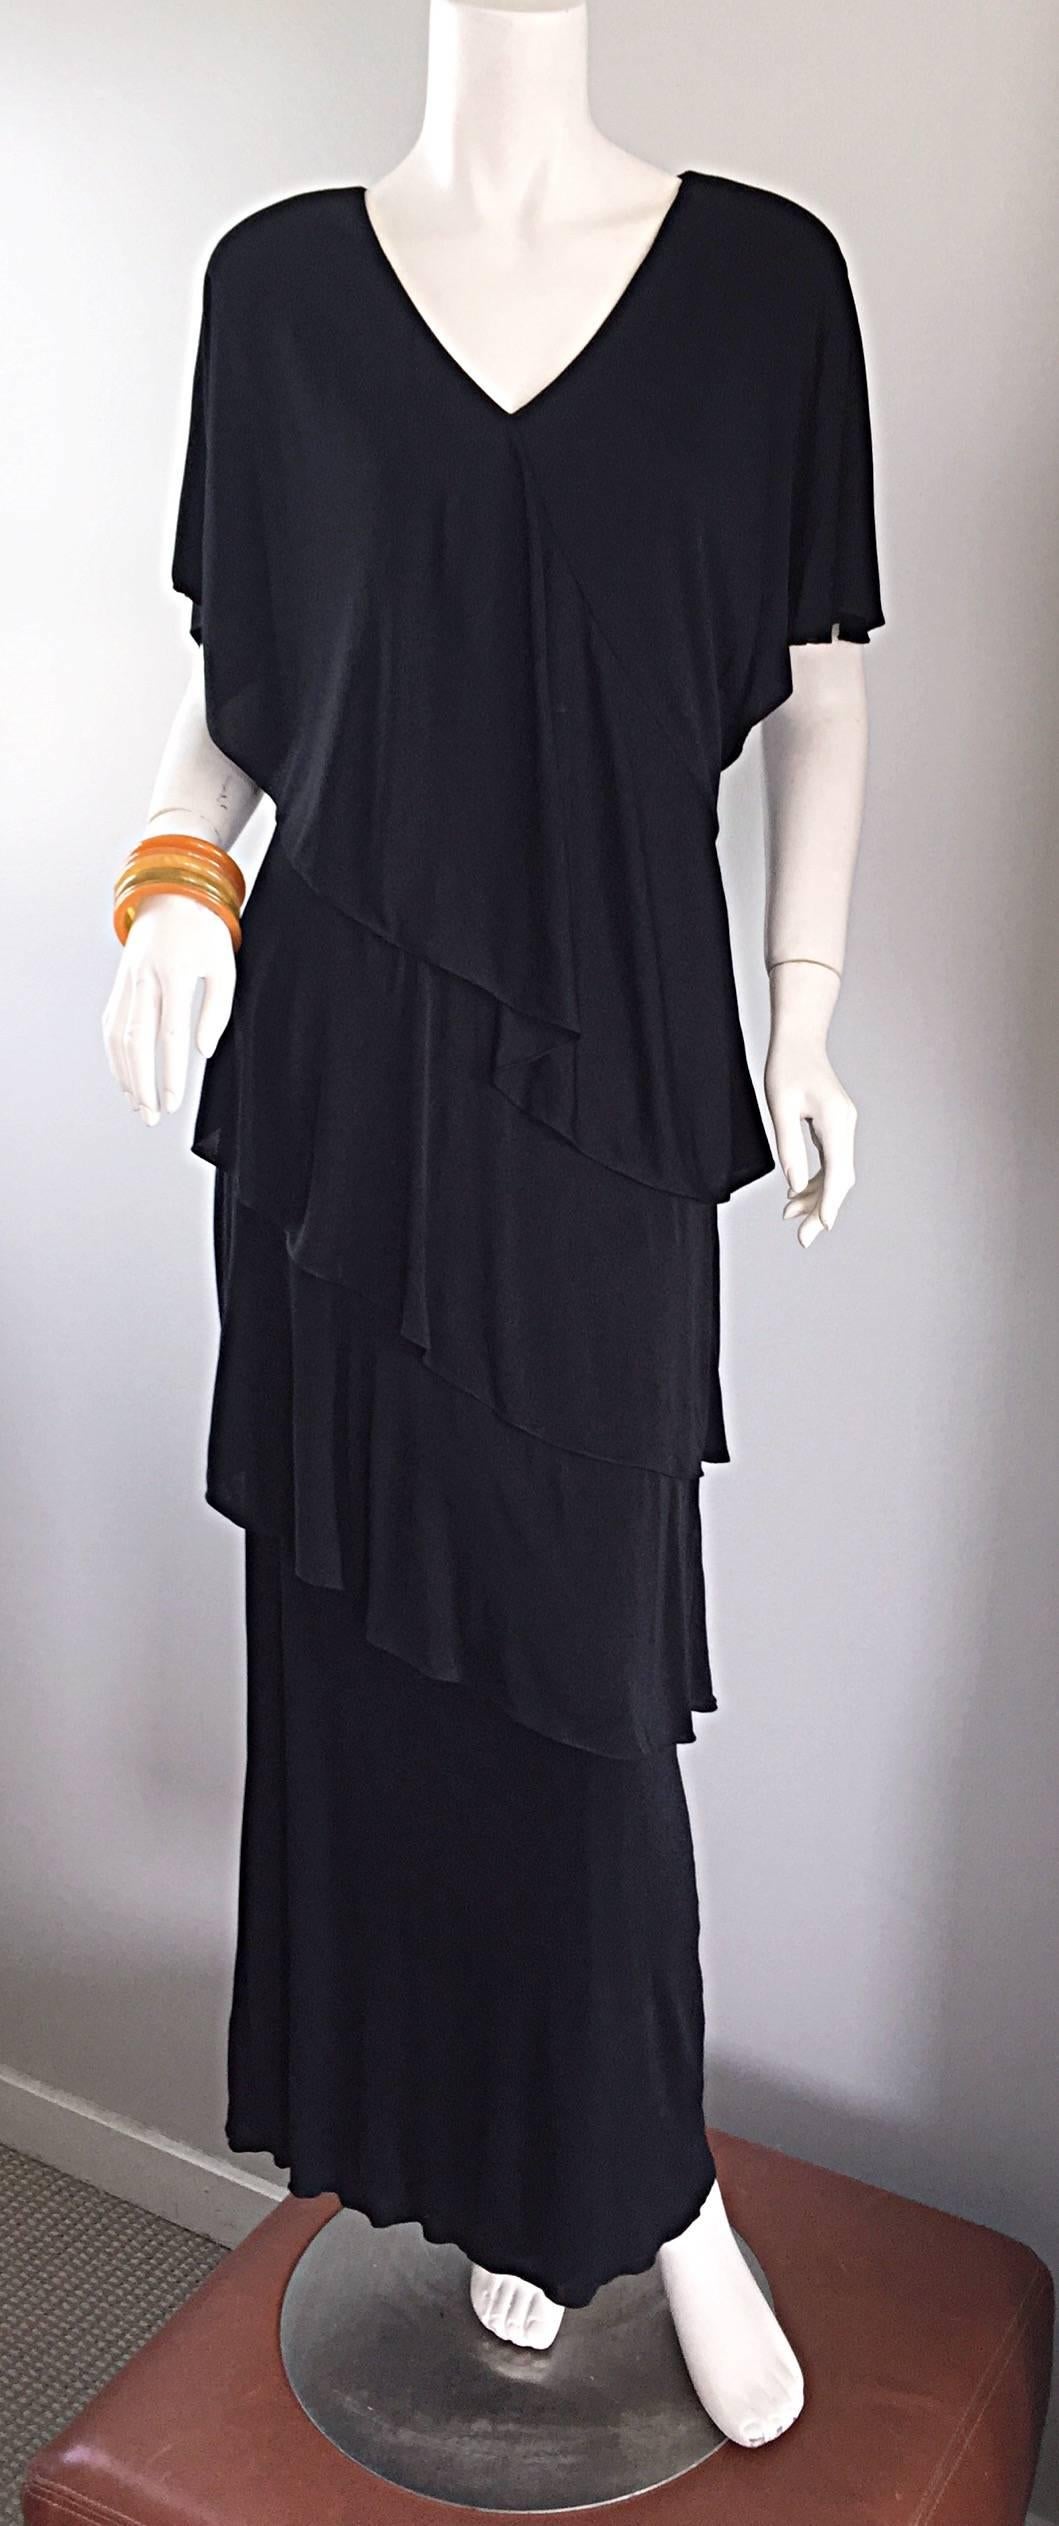 Incredible signature 1970s / 70s HOLLY'S HARP black silk jersey tiered layered boho dress / gown! Constructed with Harp's signature drapes. V-Neck, with three tiers down the front and back. Super flattering, and extremely comfortable. Definitely a